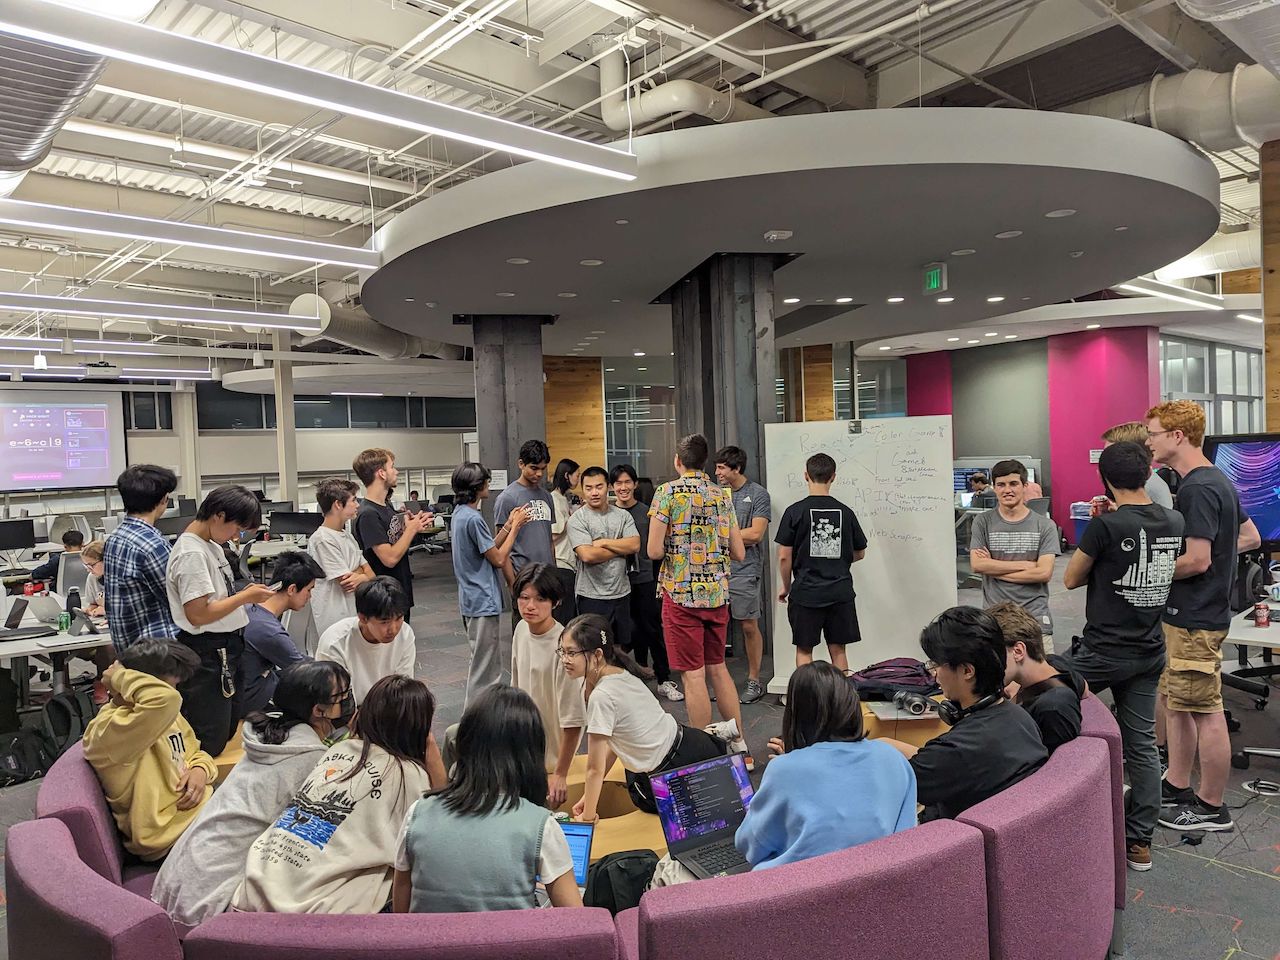 A large group of people gathered around a whiteboard in a makerspace. At the bottom of the image is a purple couch arranged in a half-circle, which many are sitting on.